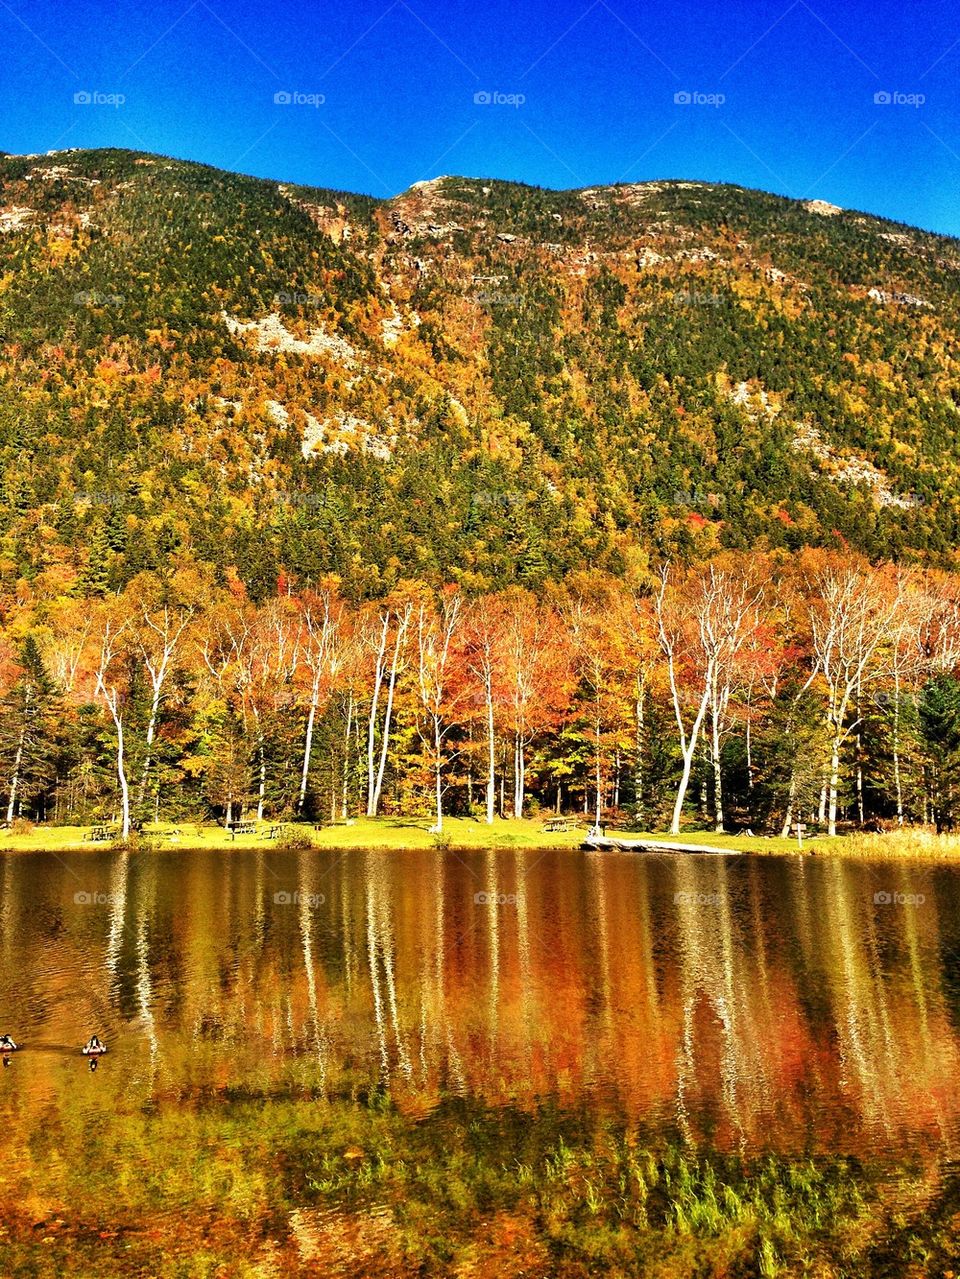 Jackson New Hampshire in Fall